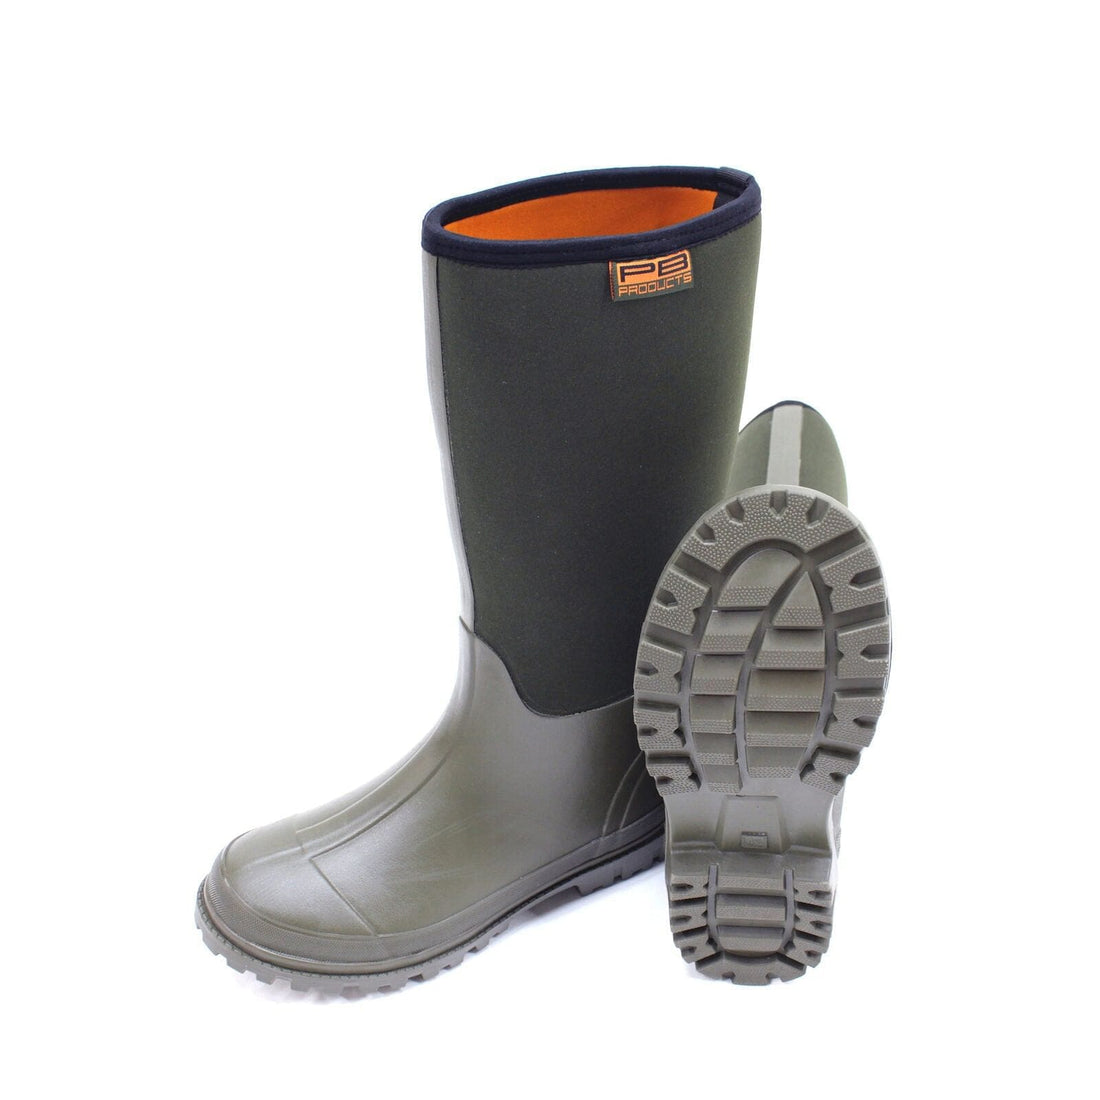 PB Products Neoprene Boots 6mm 46